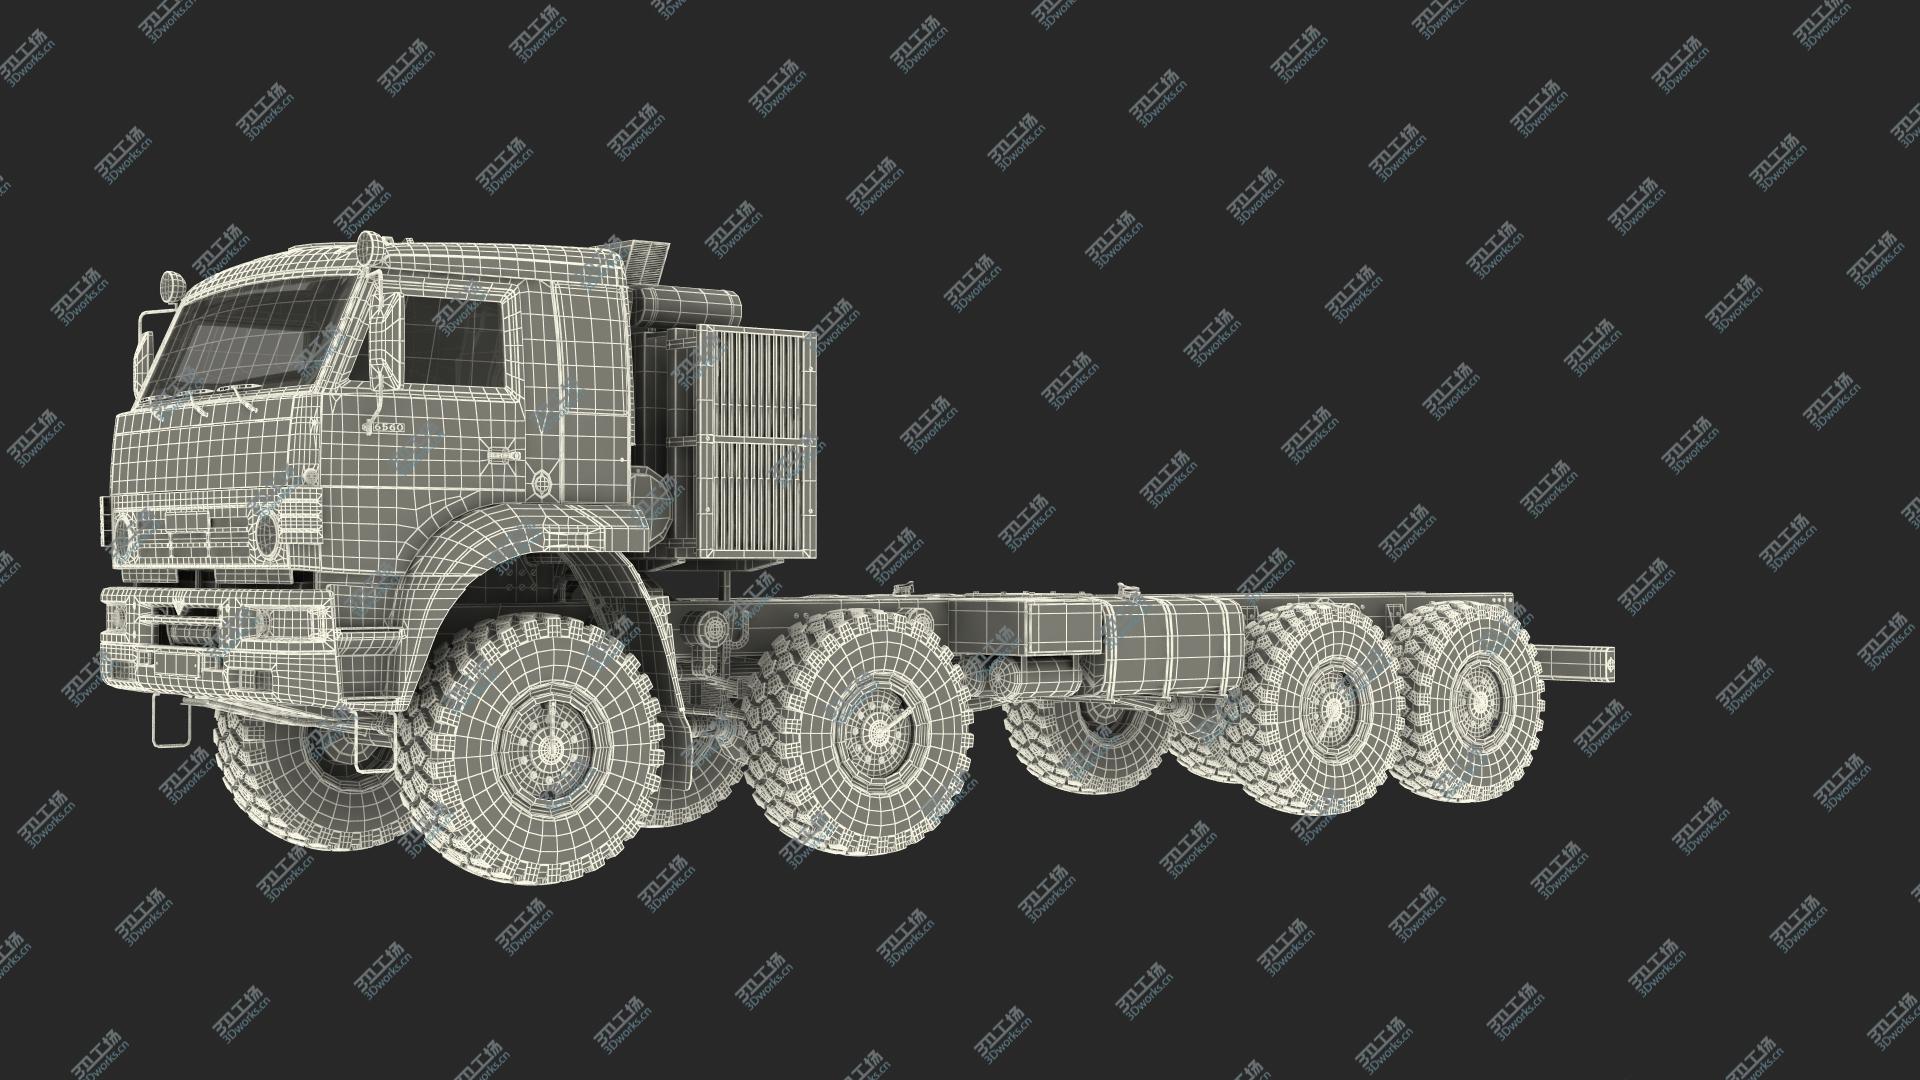 images/goods_img/202104021/3D 8x8 Truck Generic Rigged/5.jpg